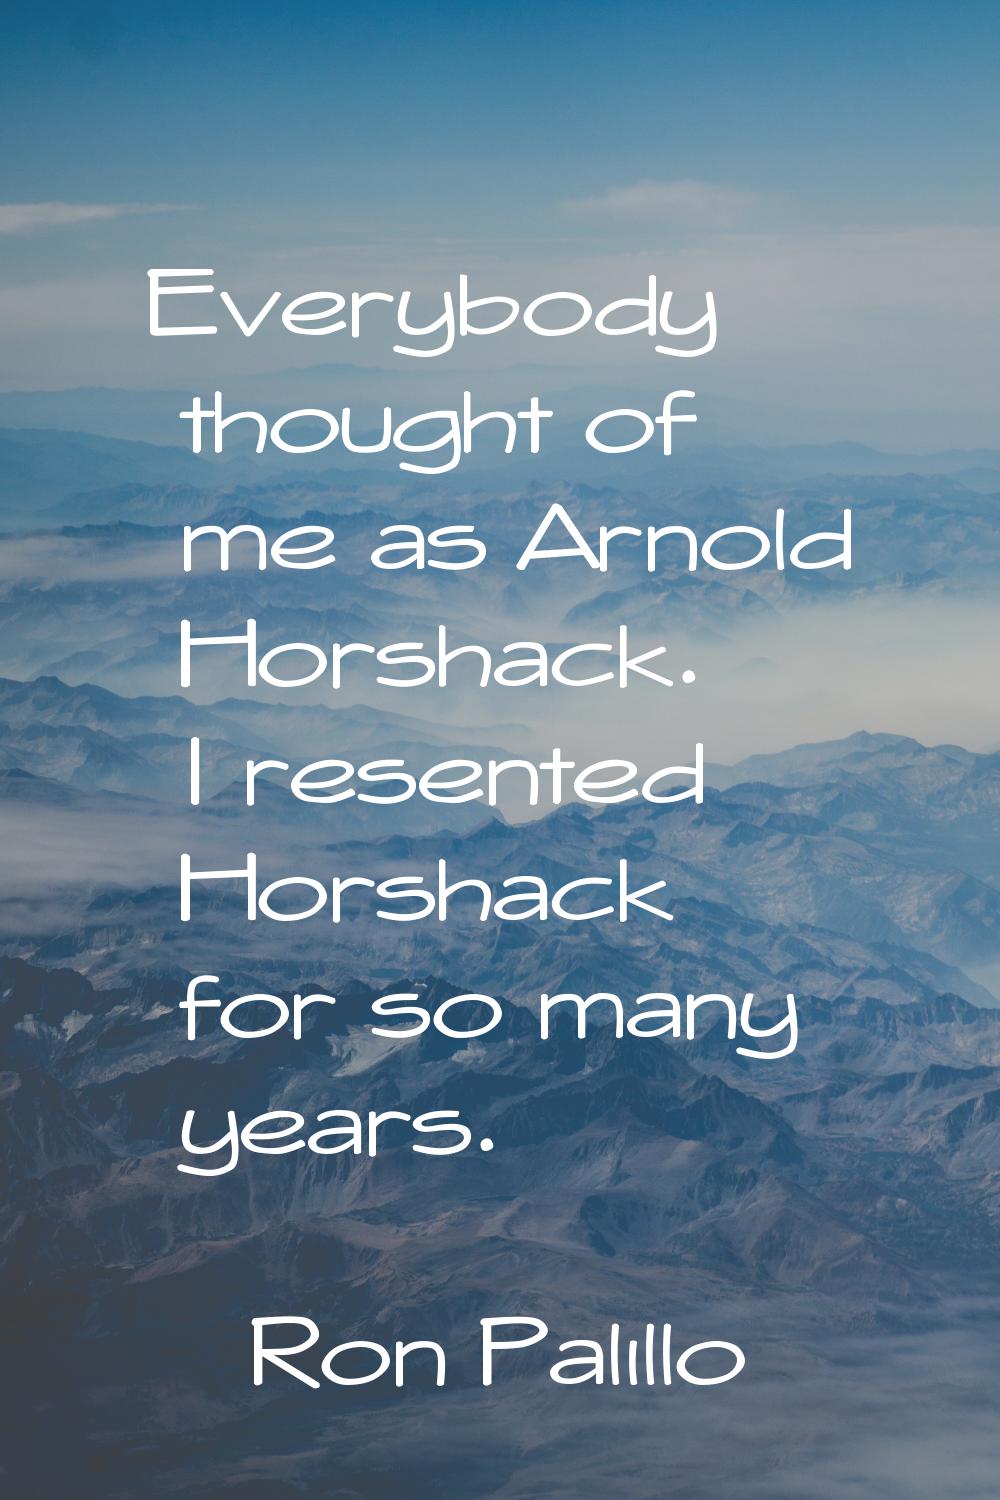 Everybody thought of me as Arnold Horshack. I resented Horshack for so many years.